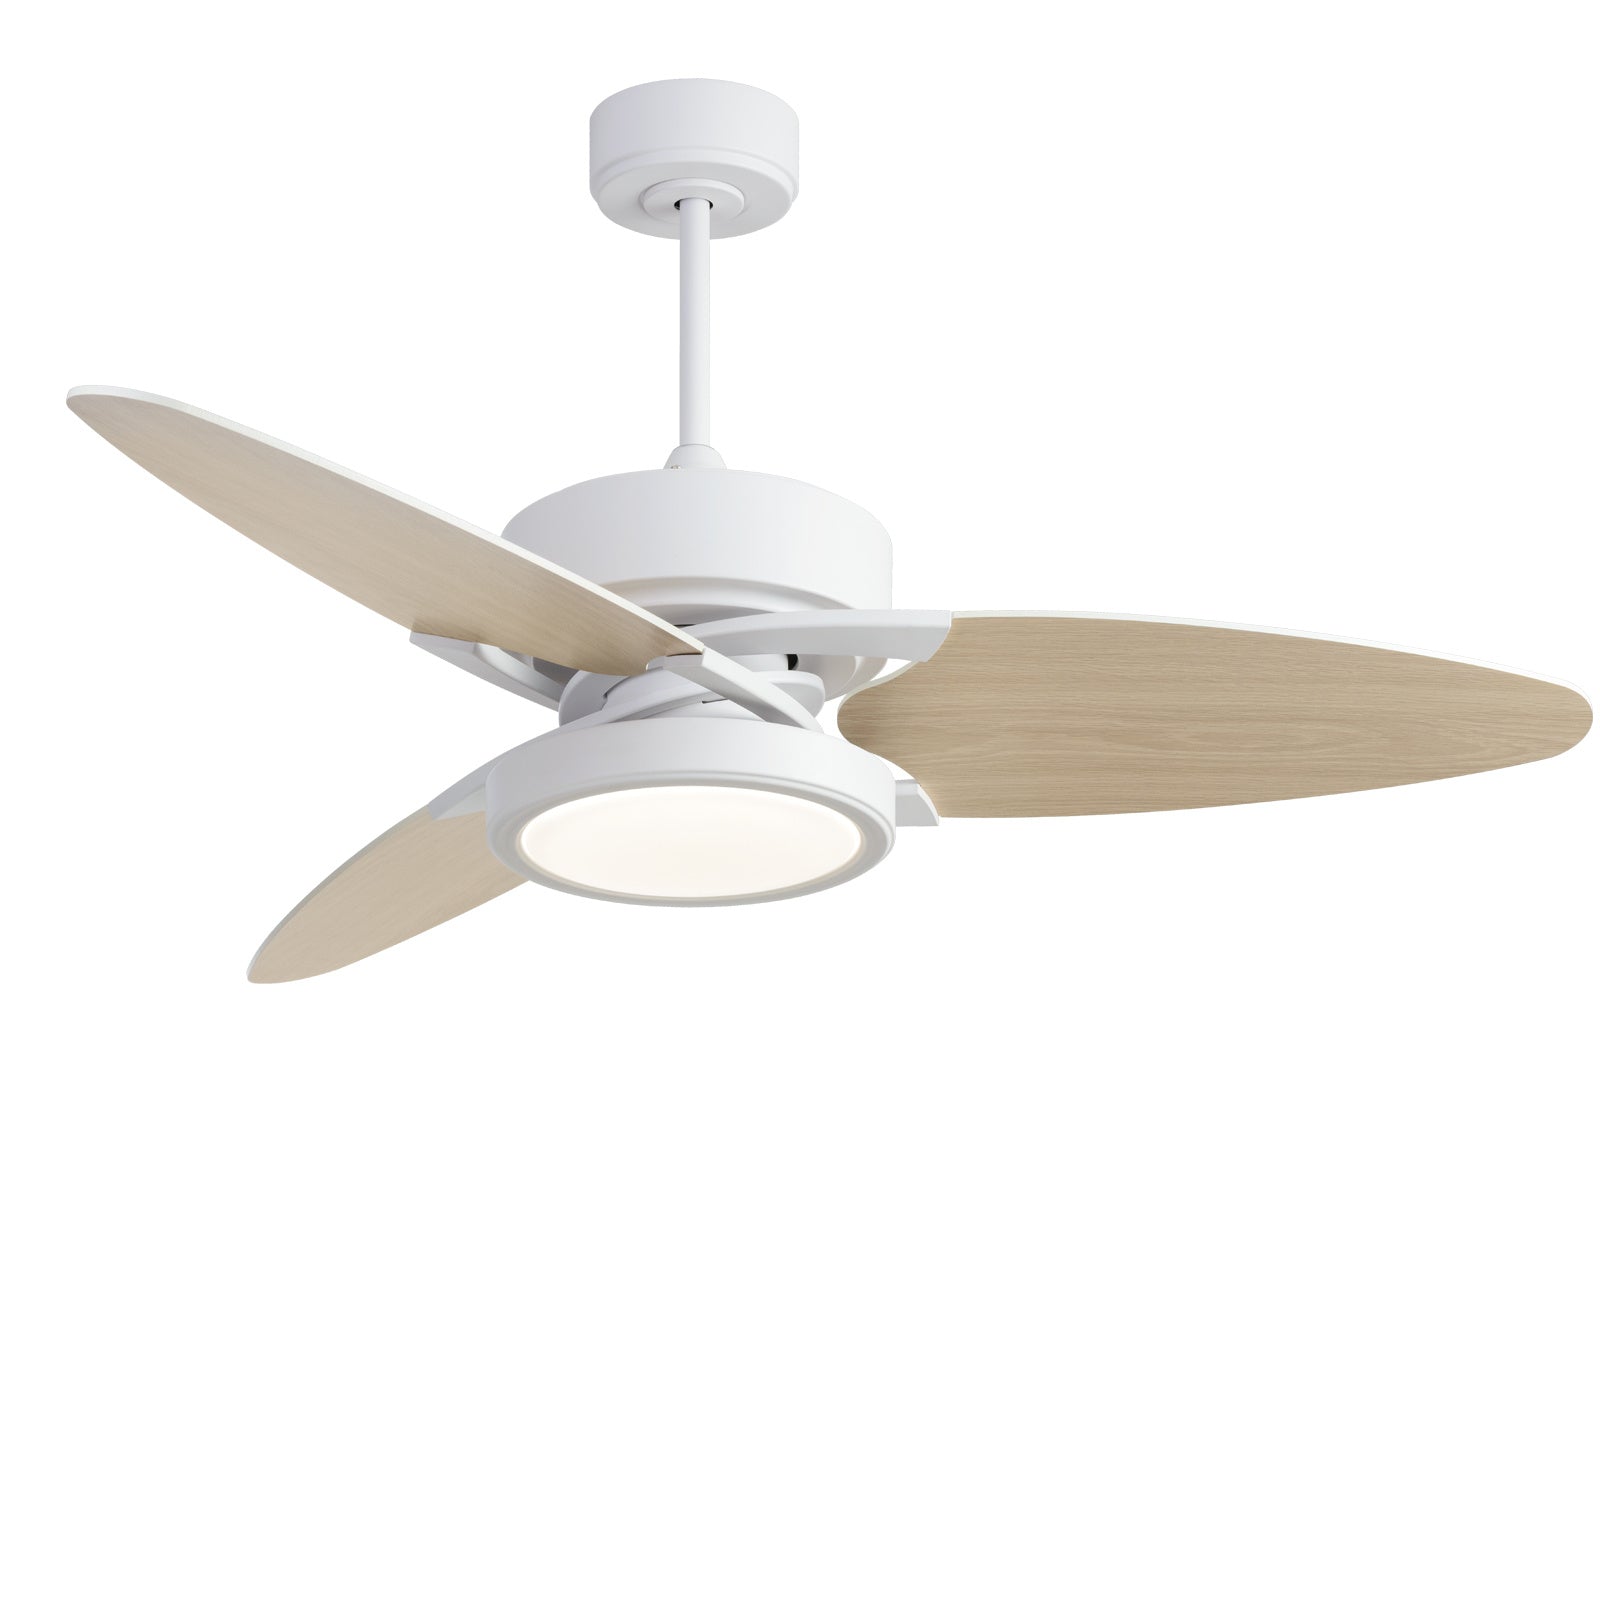 52 In Light wood Ceiling Fan Lighting with Remote Control Home Decor by Design